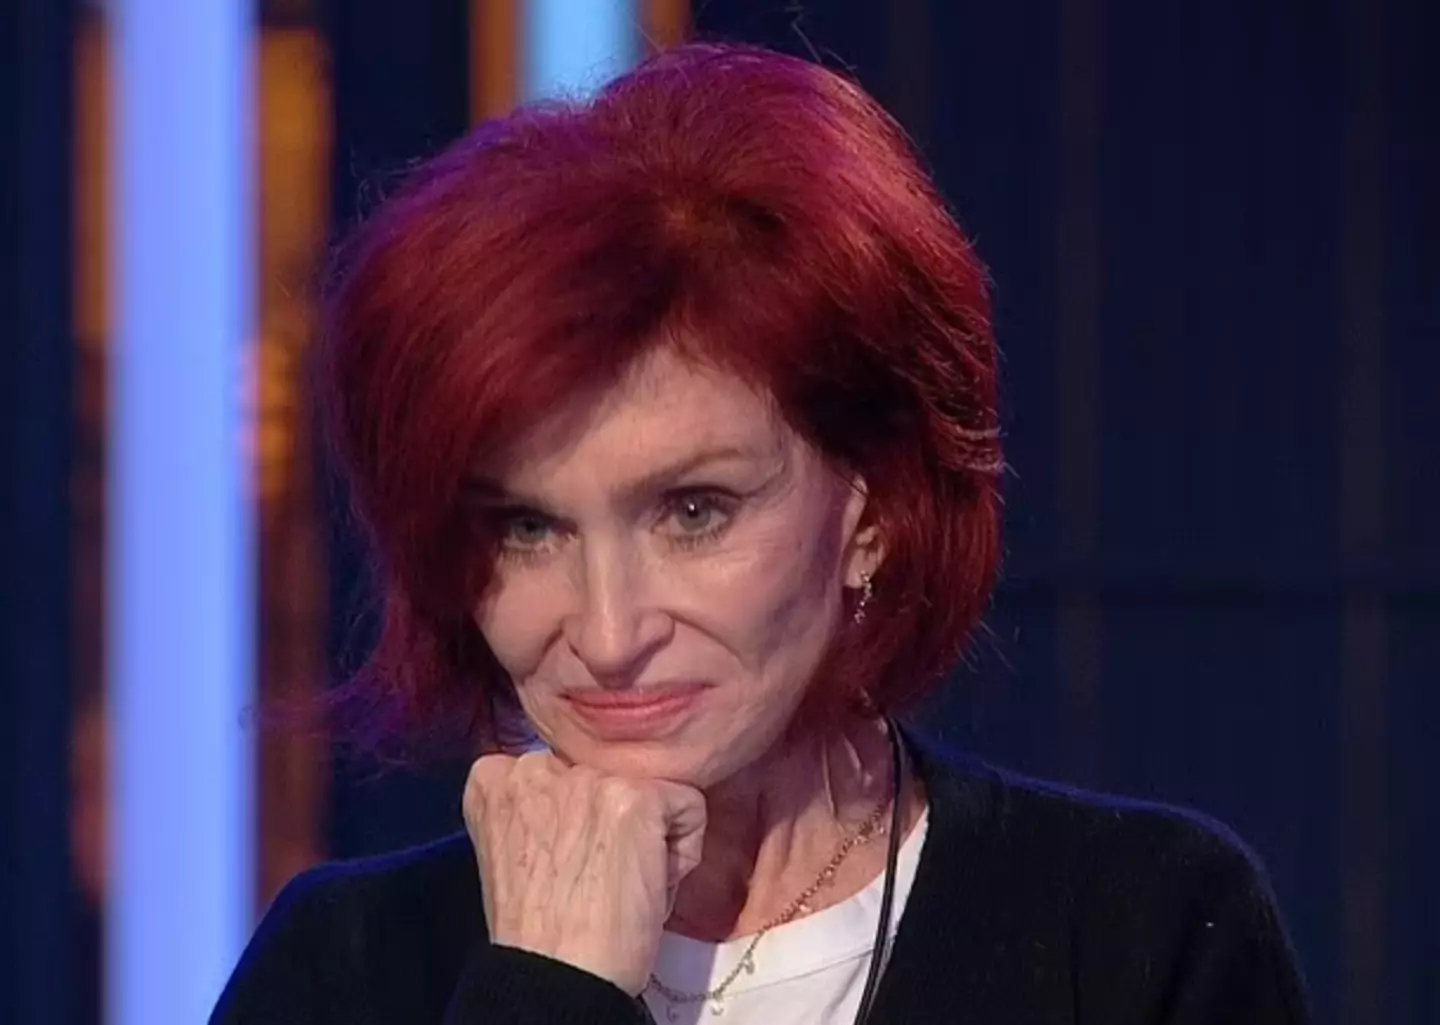 A body language expert claims Sharon was 'extremely sad' while departing from the show.